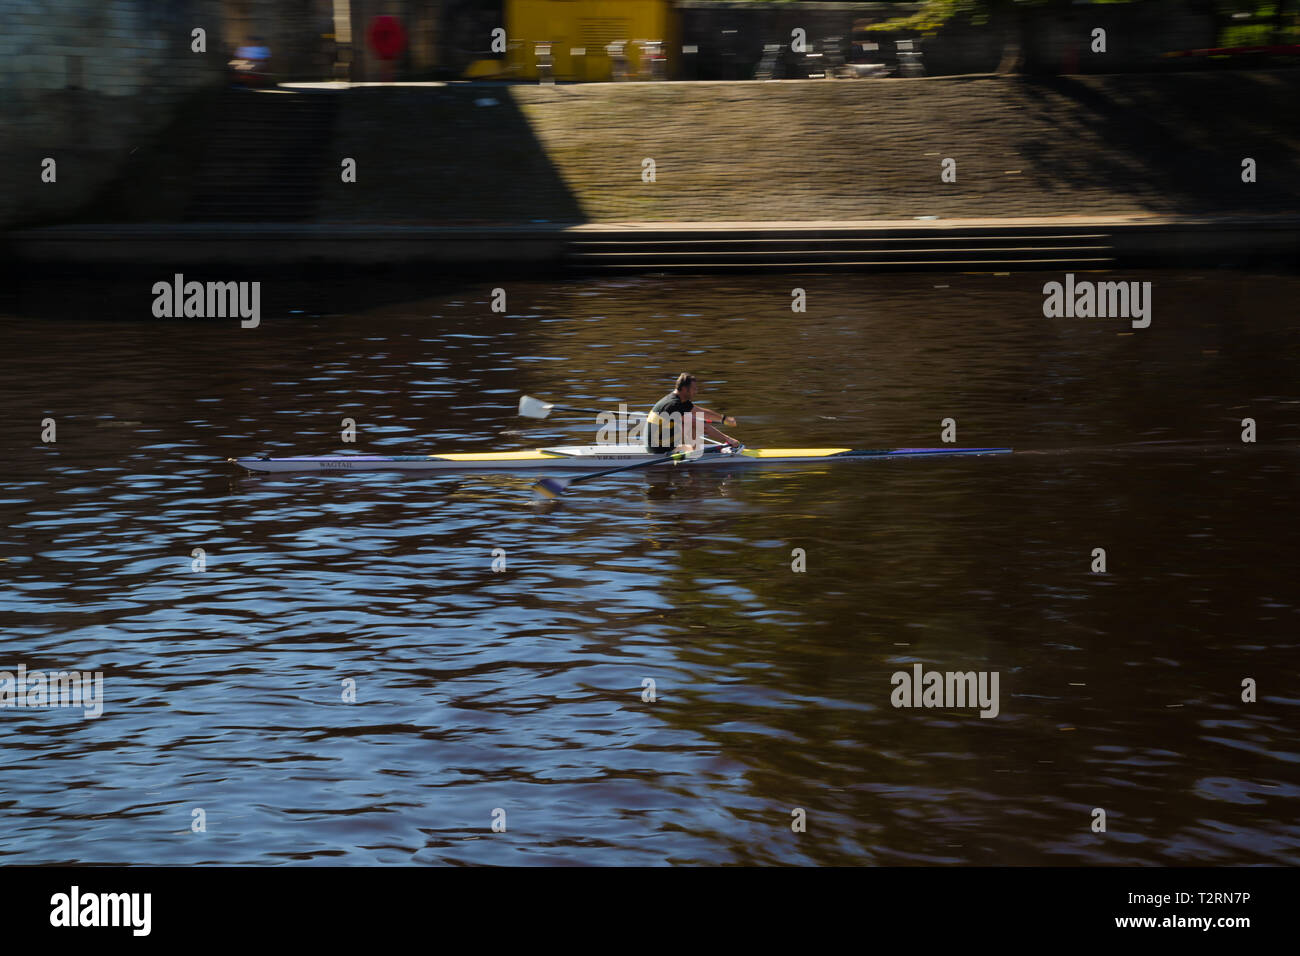 York, North Yorkshire. A man in his sculling boat on the River Ouse in York. Stock Photo